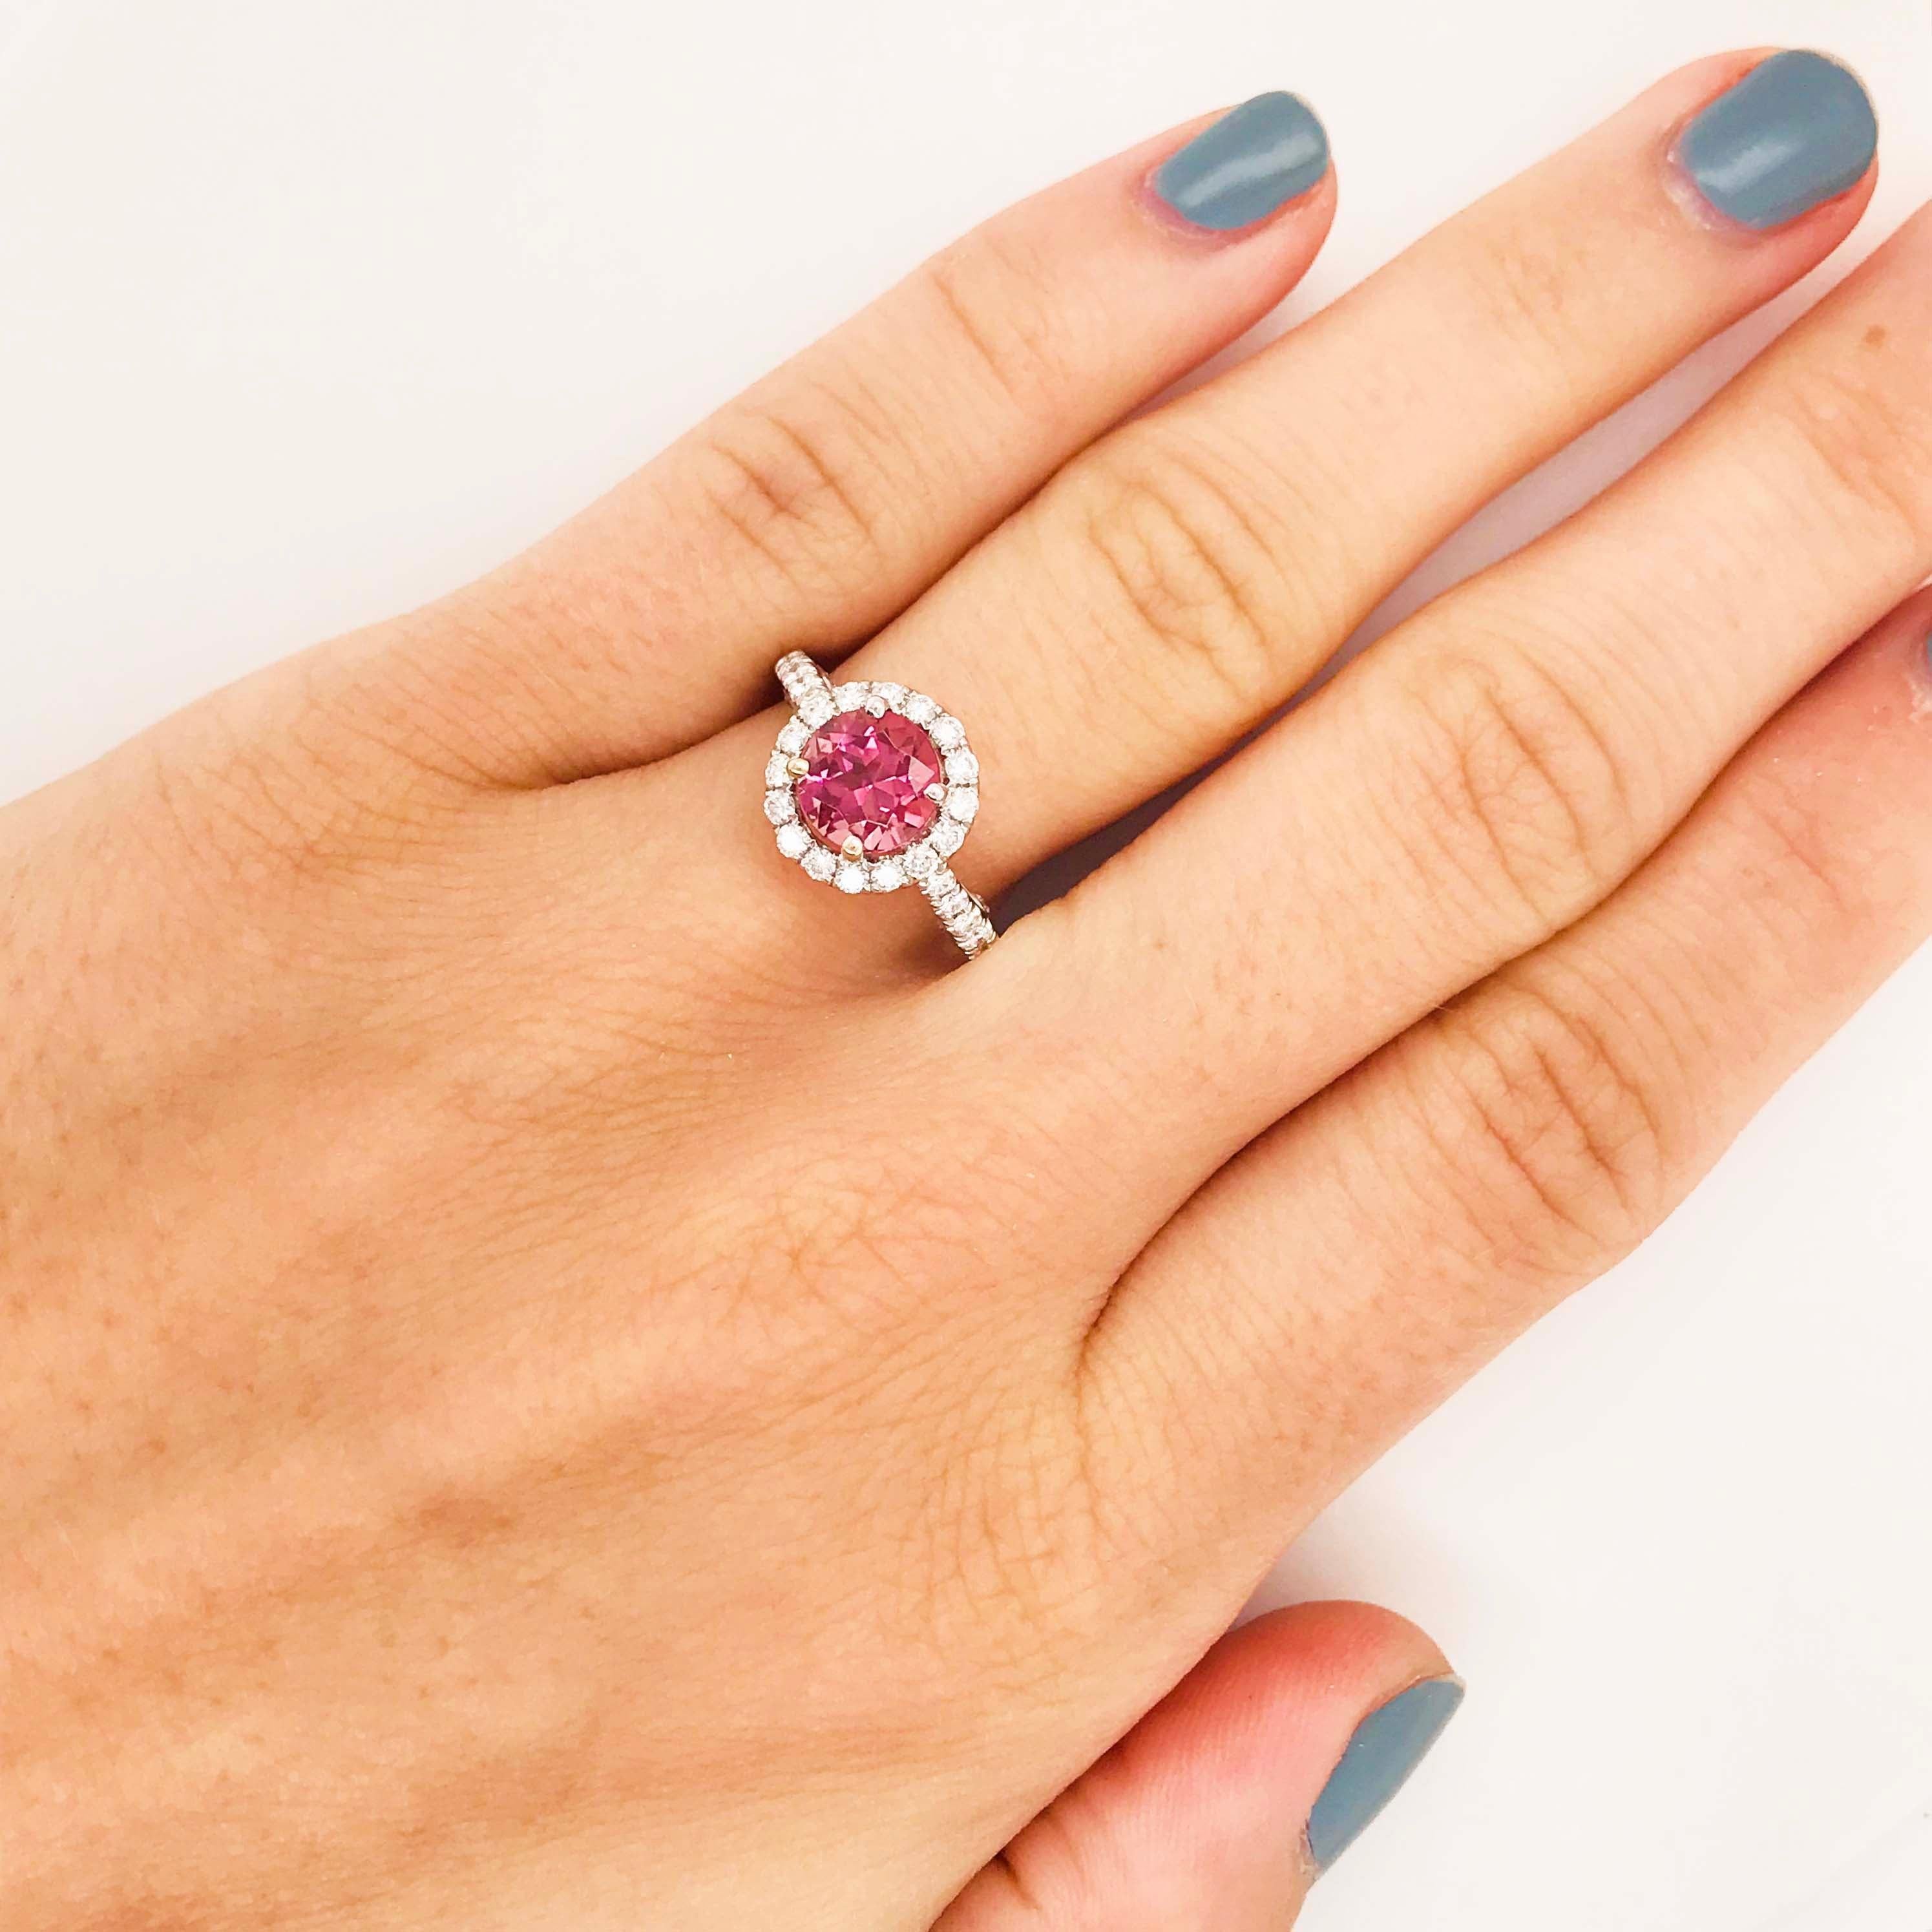 For Sale:  Pink Tourmaline and Diamond Ring, White Gold 2 Carat Diamond and Gem Engagement 2